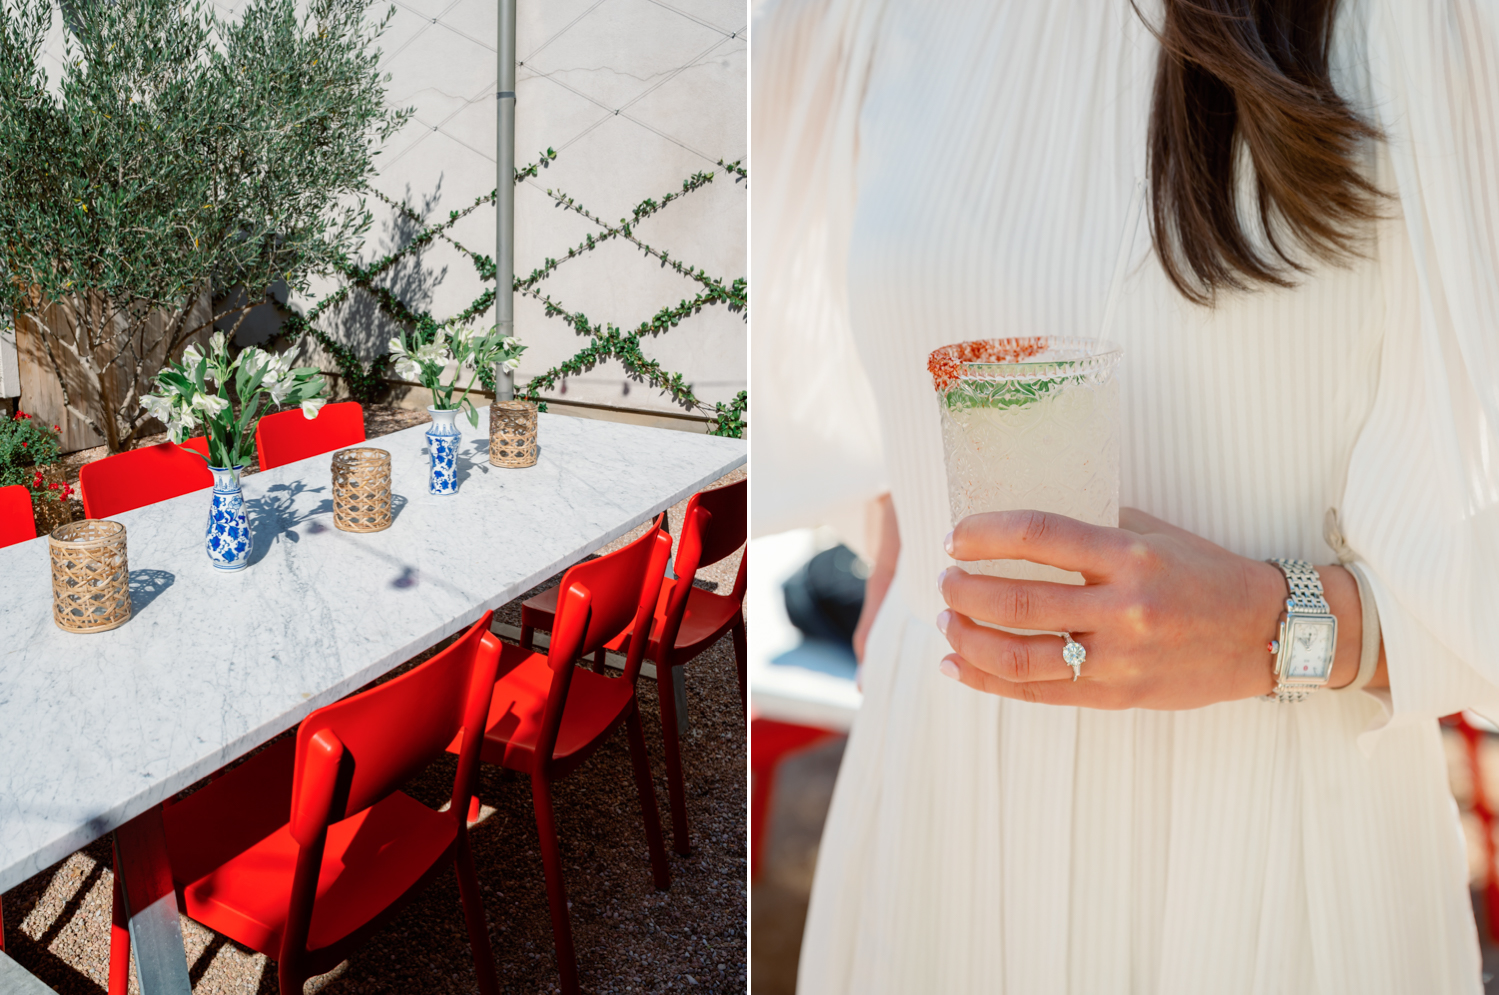 Left: the outside tables with red chairs at Elizabeth Street Cafe for the bridal shower. Right: the bride holding a margarita and showing off her ring